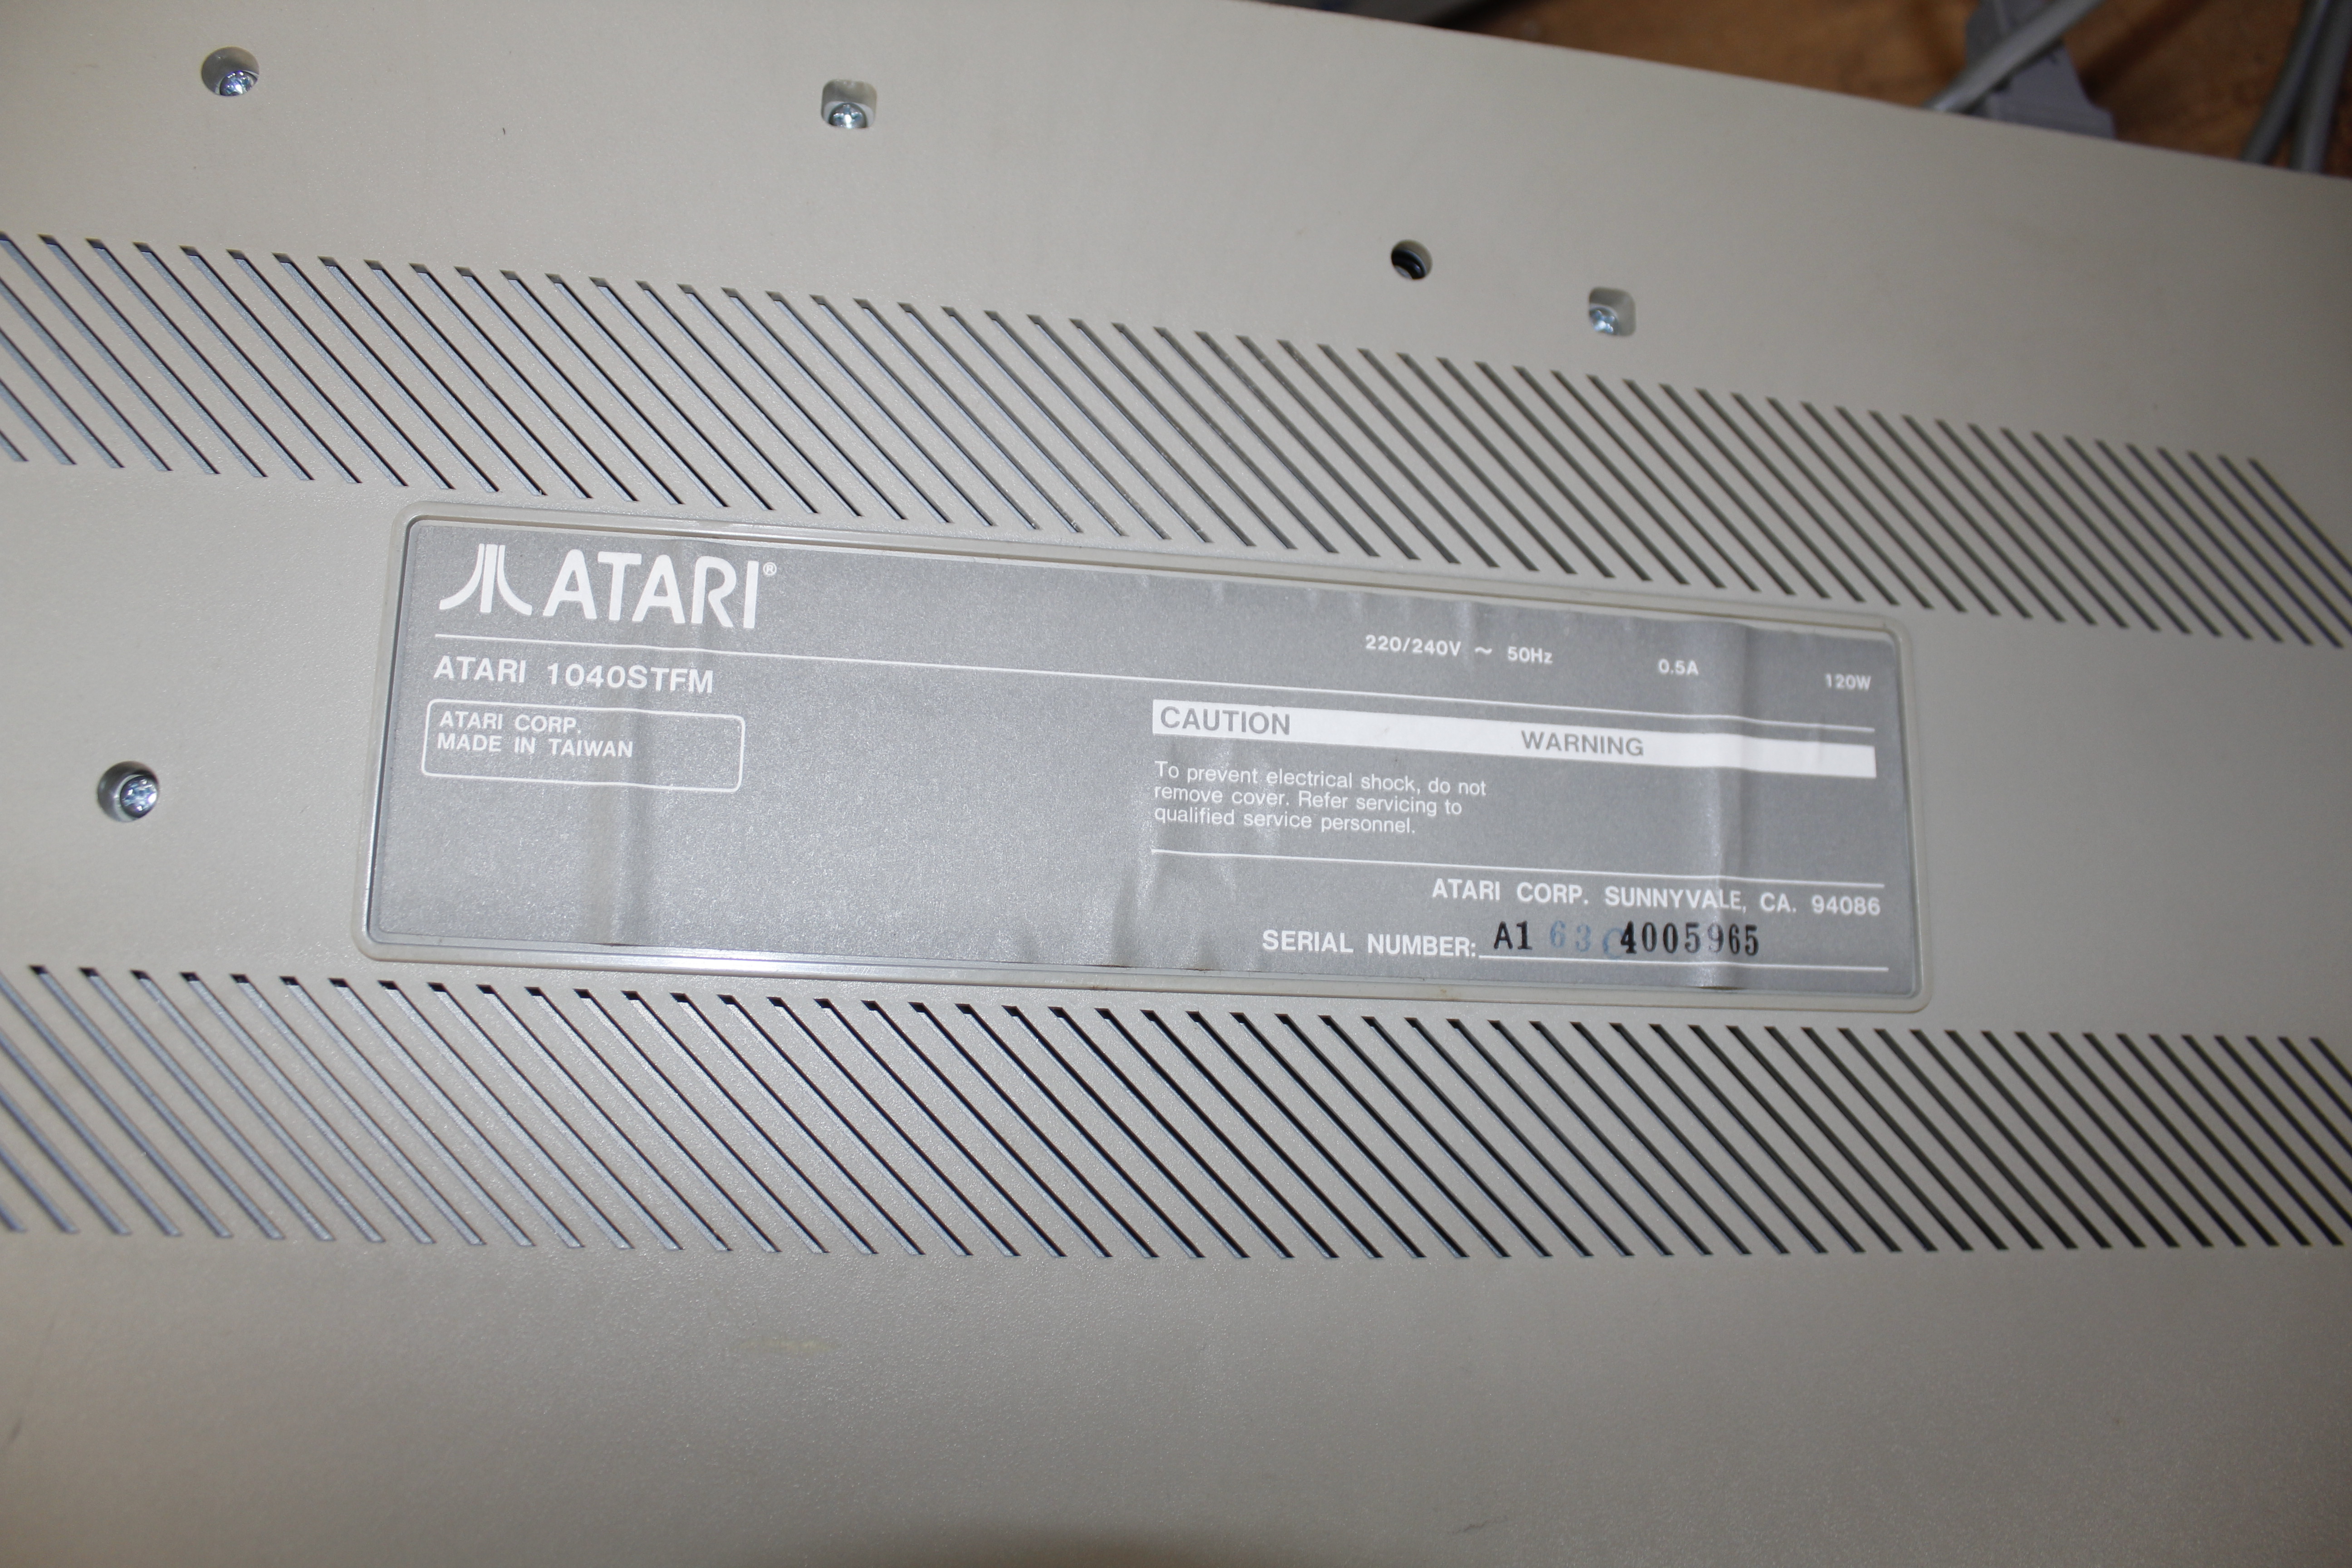 An Atari 1040STF computer with two monitors, boxes and manuals etc. - Image 5 of 8